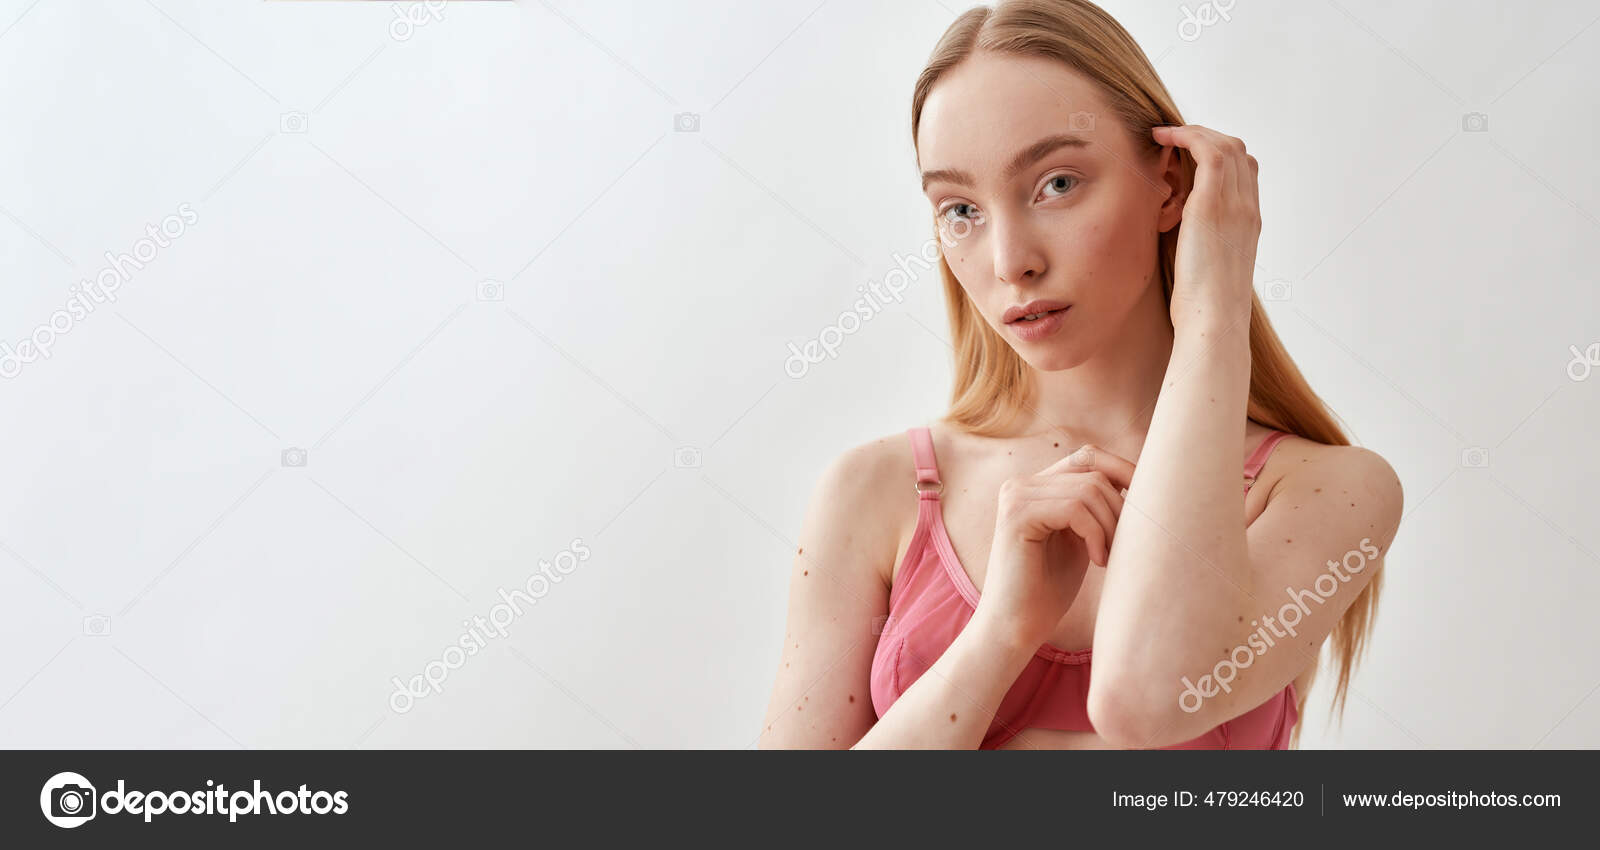 Cute Young Blonde Woman with Slim Body Wearing Pink Transparent Underwear  Looking at Camera while Posing with Arms Stock Photo - Image of people,  healthy: 220030262